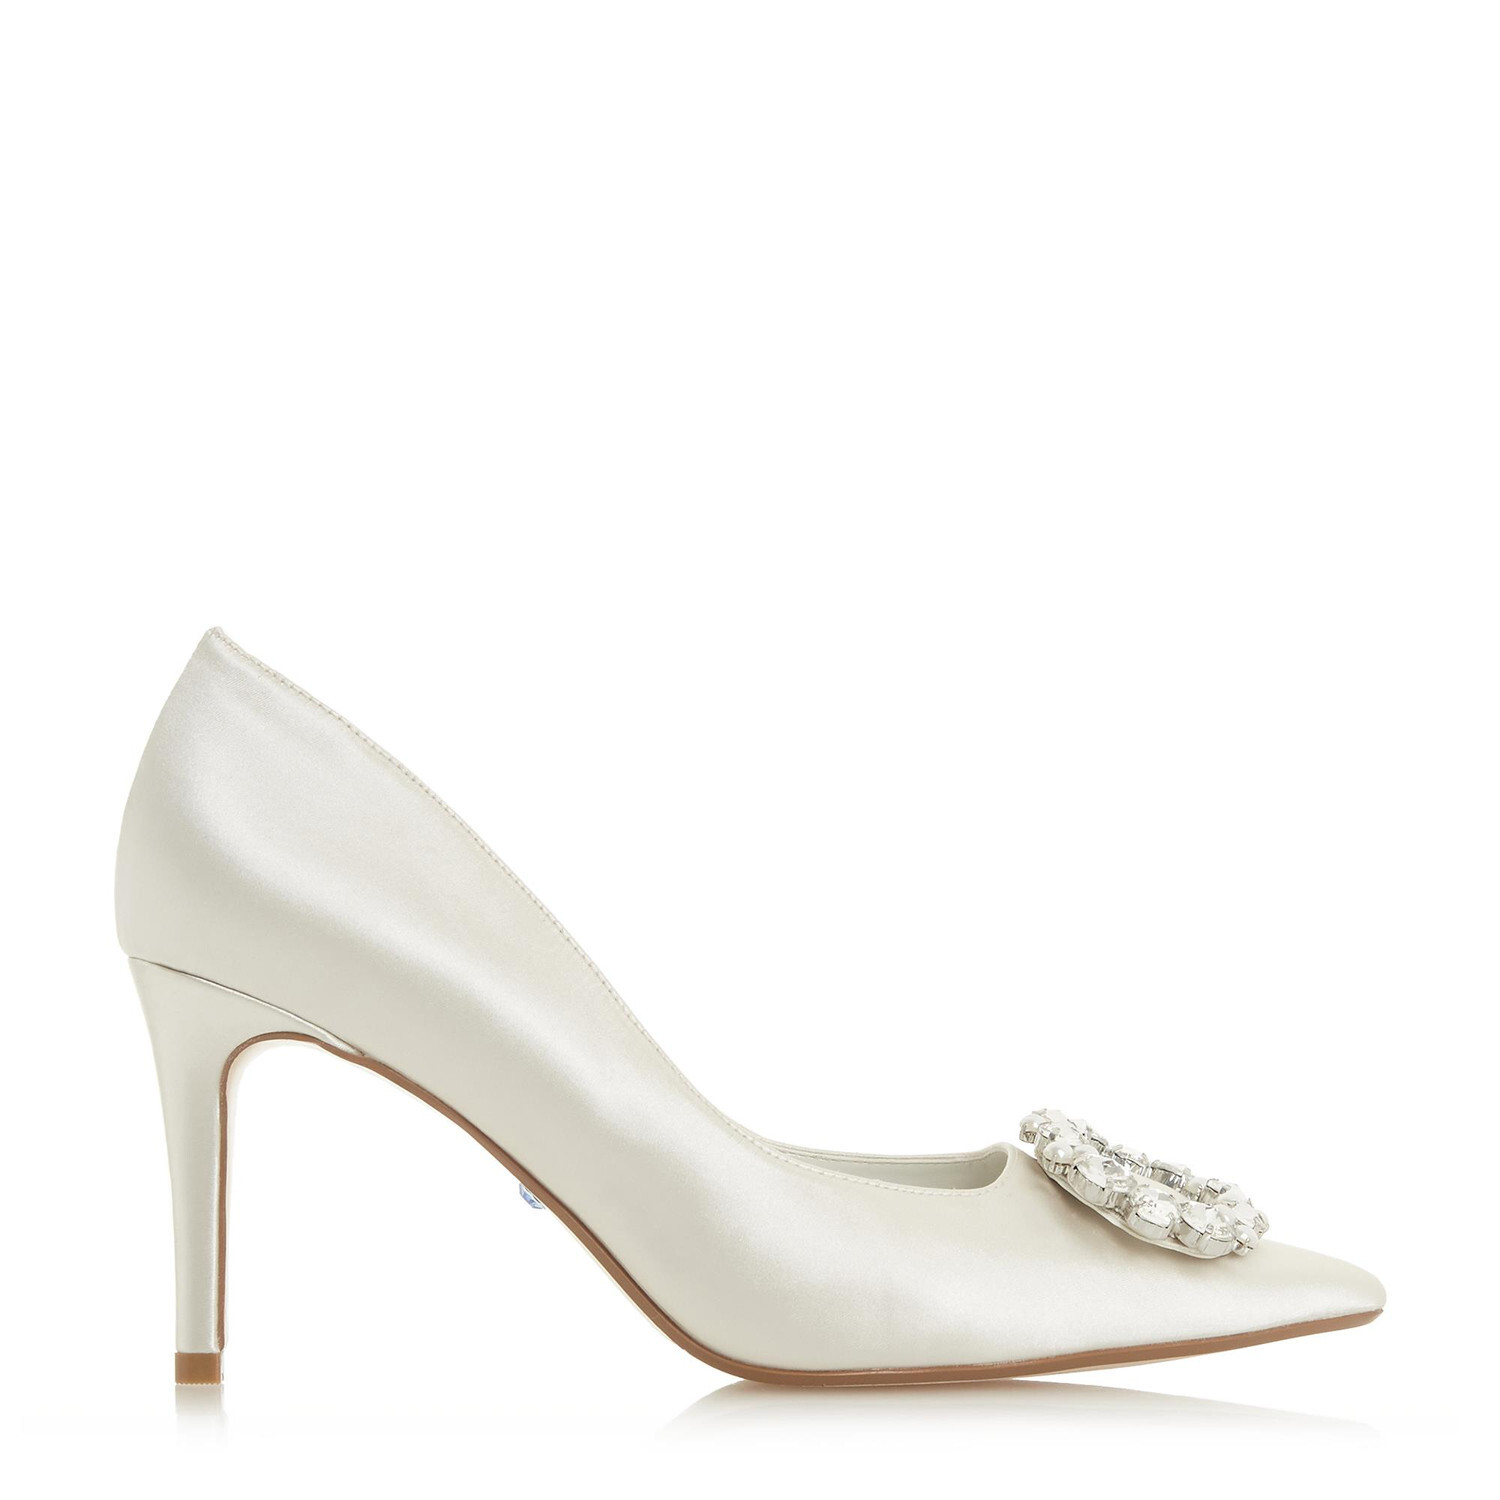 Adorne Wedding Shoes from Dune London - hitched.co.uk